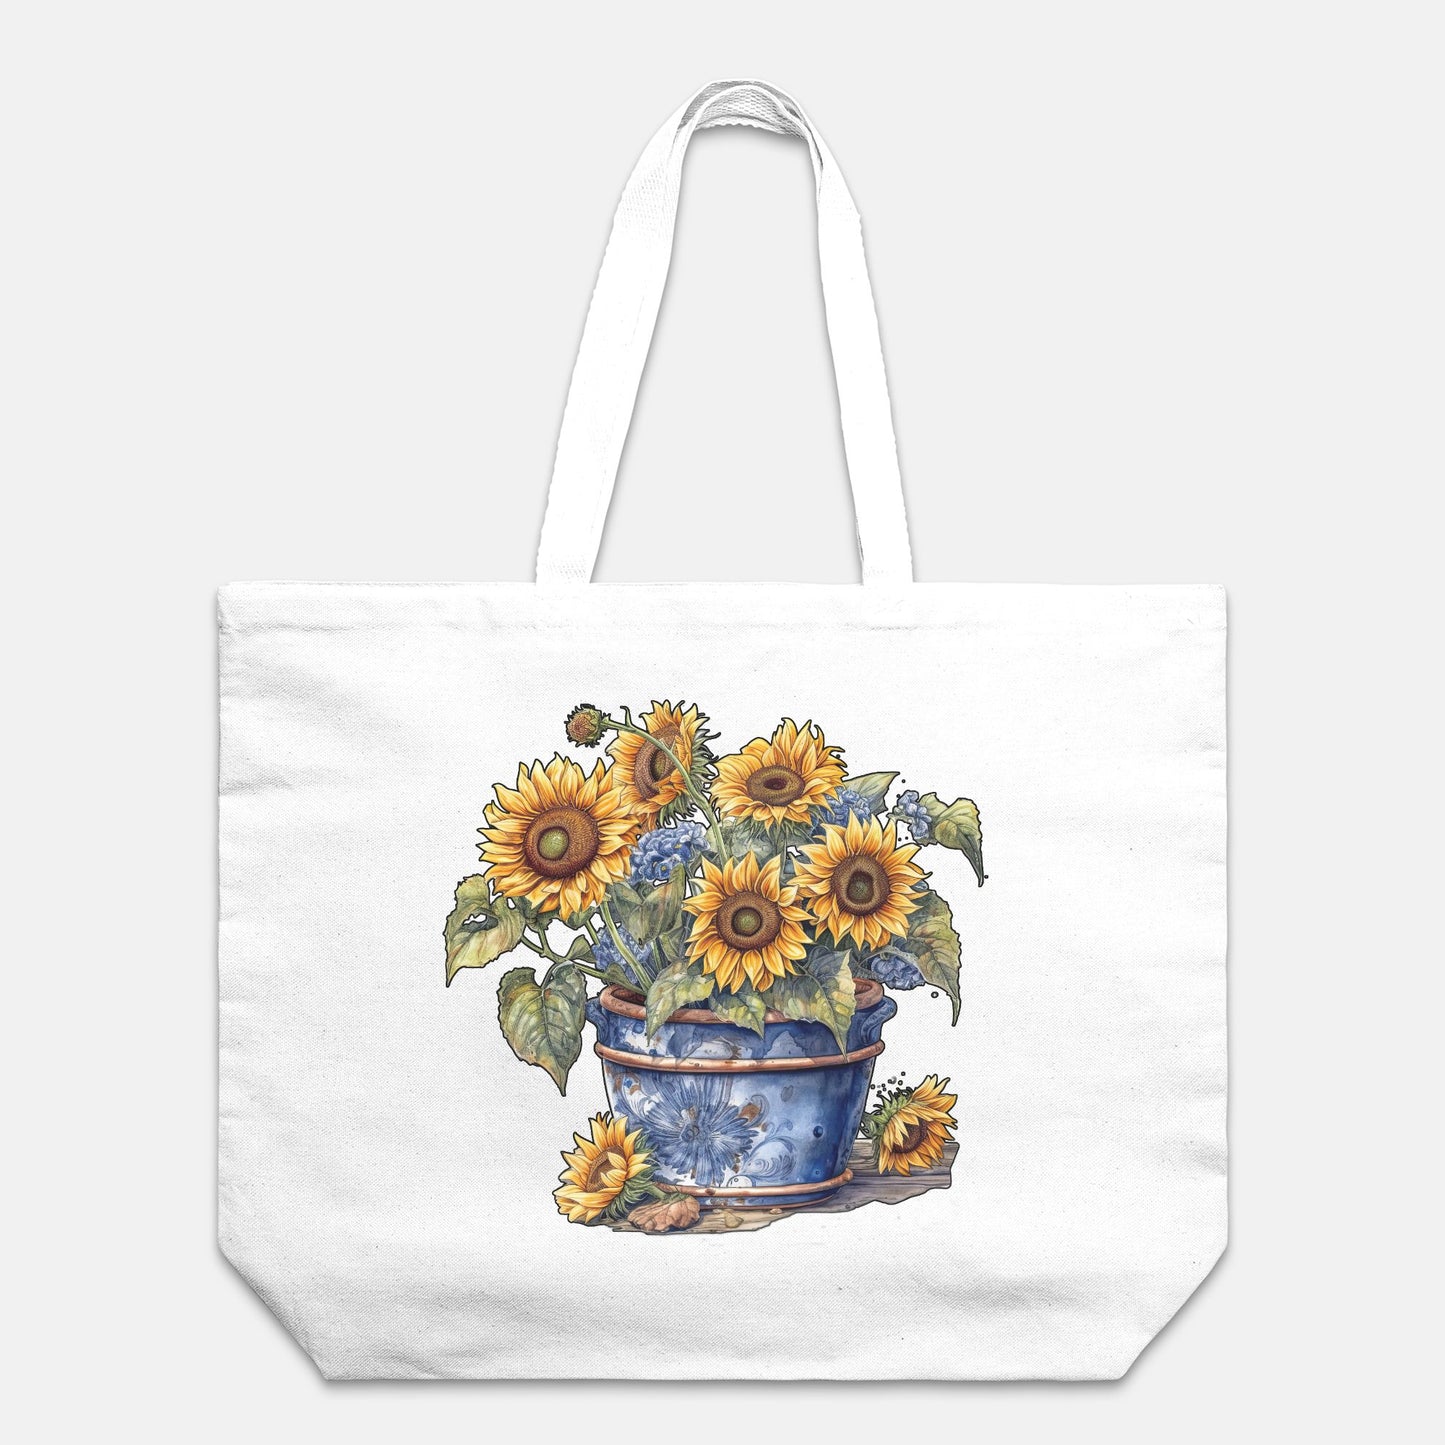 Sunflower Bliss Tote Bag Oversized Tote